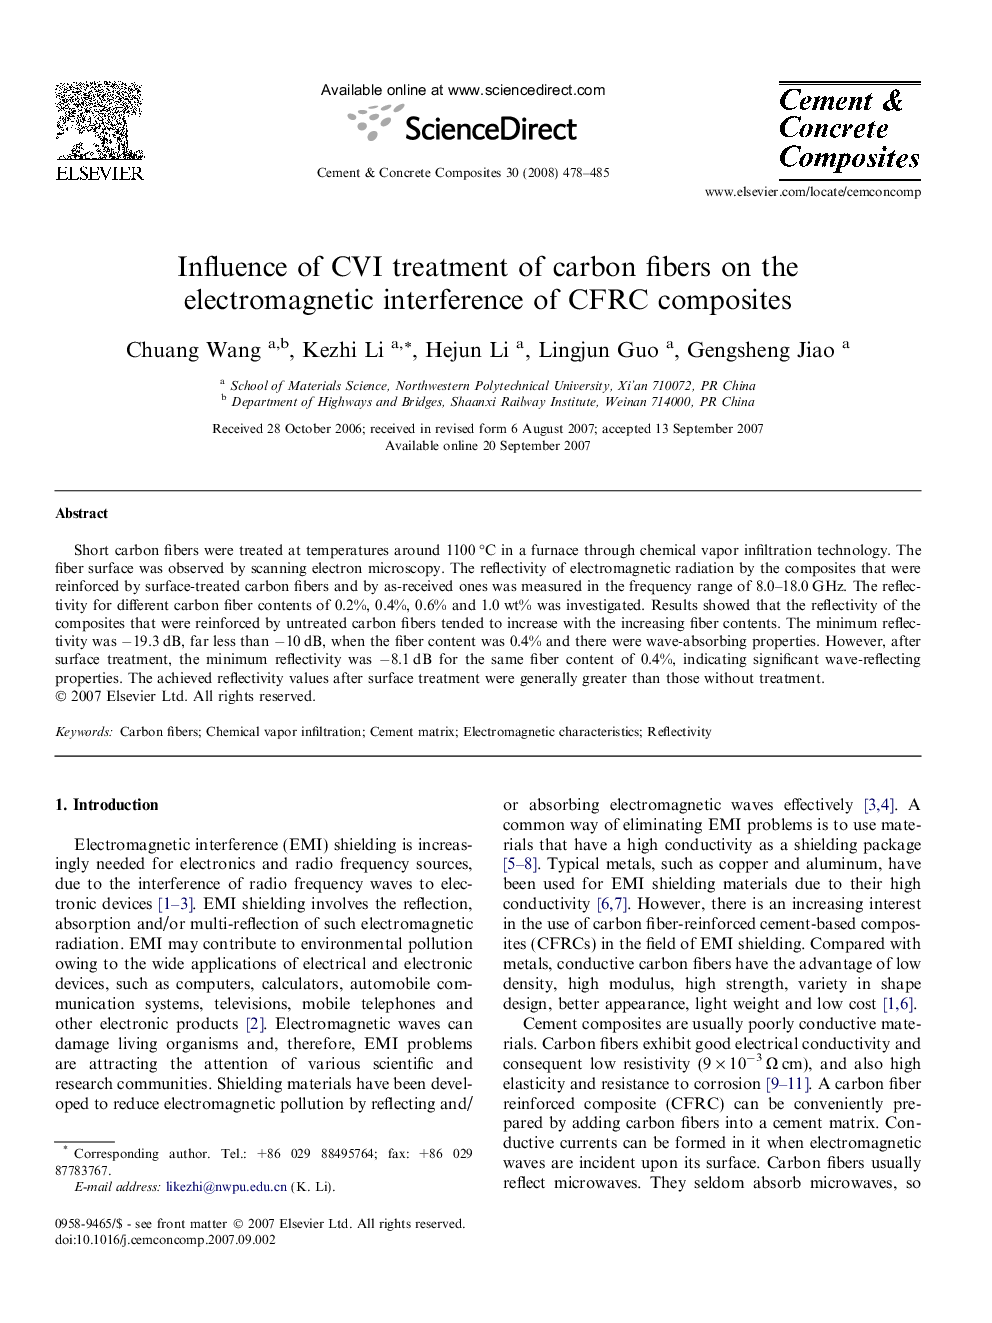 Influence of CVI treatment of carbon fibers on the electromagnetic interference of CFRC composites